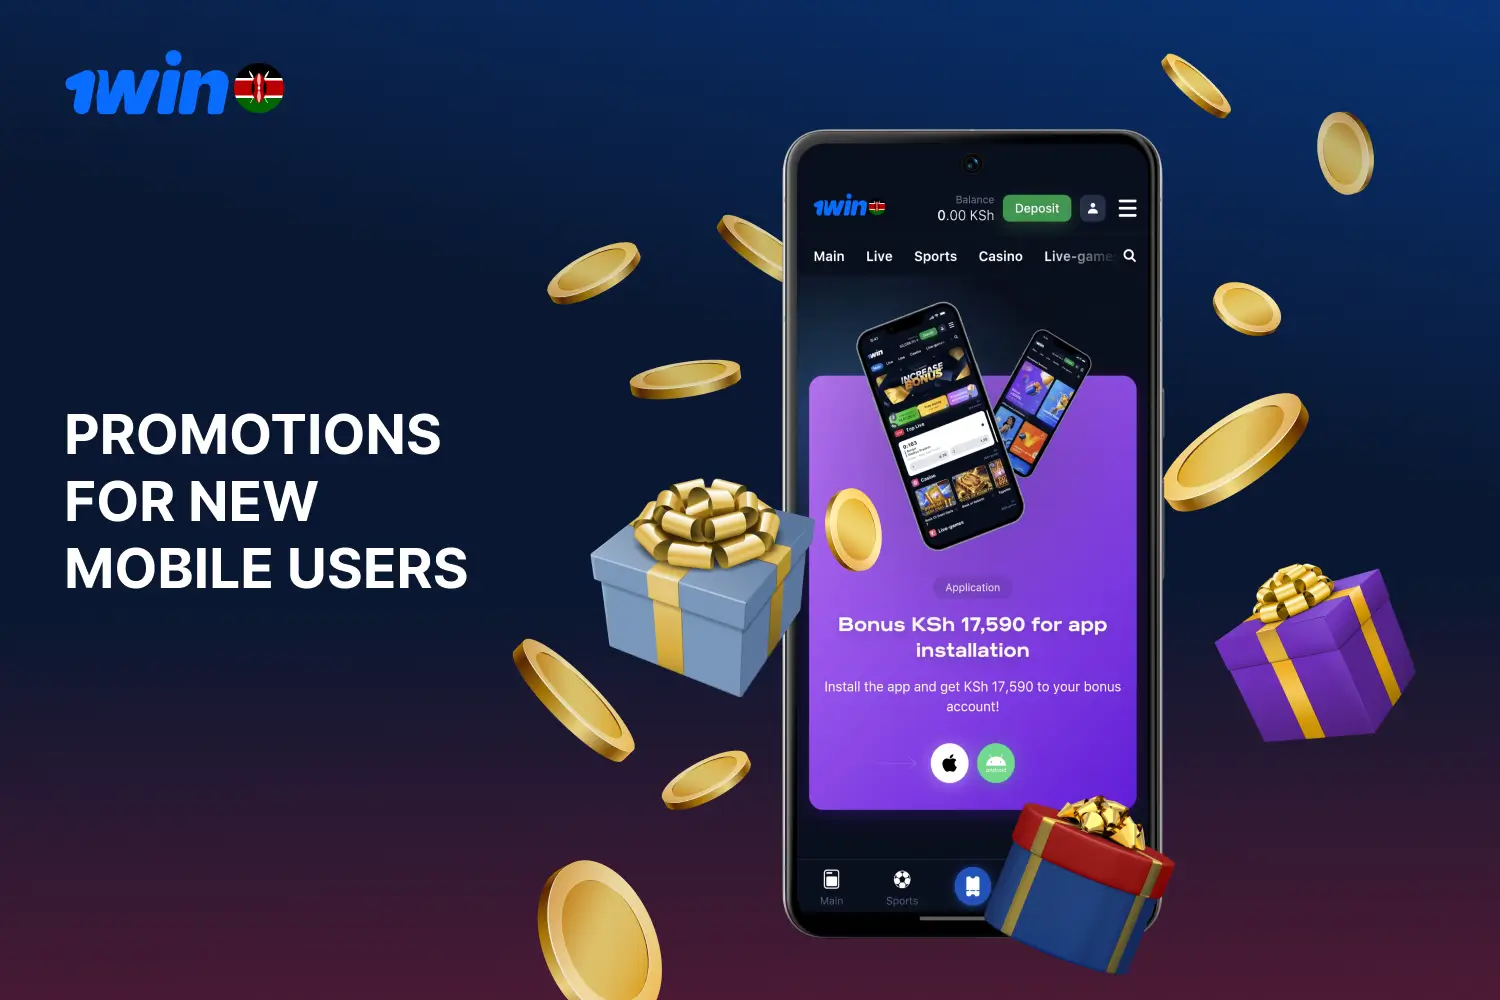 A welcome bonus package awaits new users of the 1win mobile app from Kenya